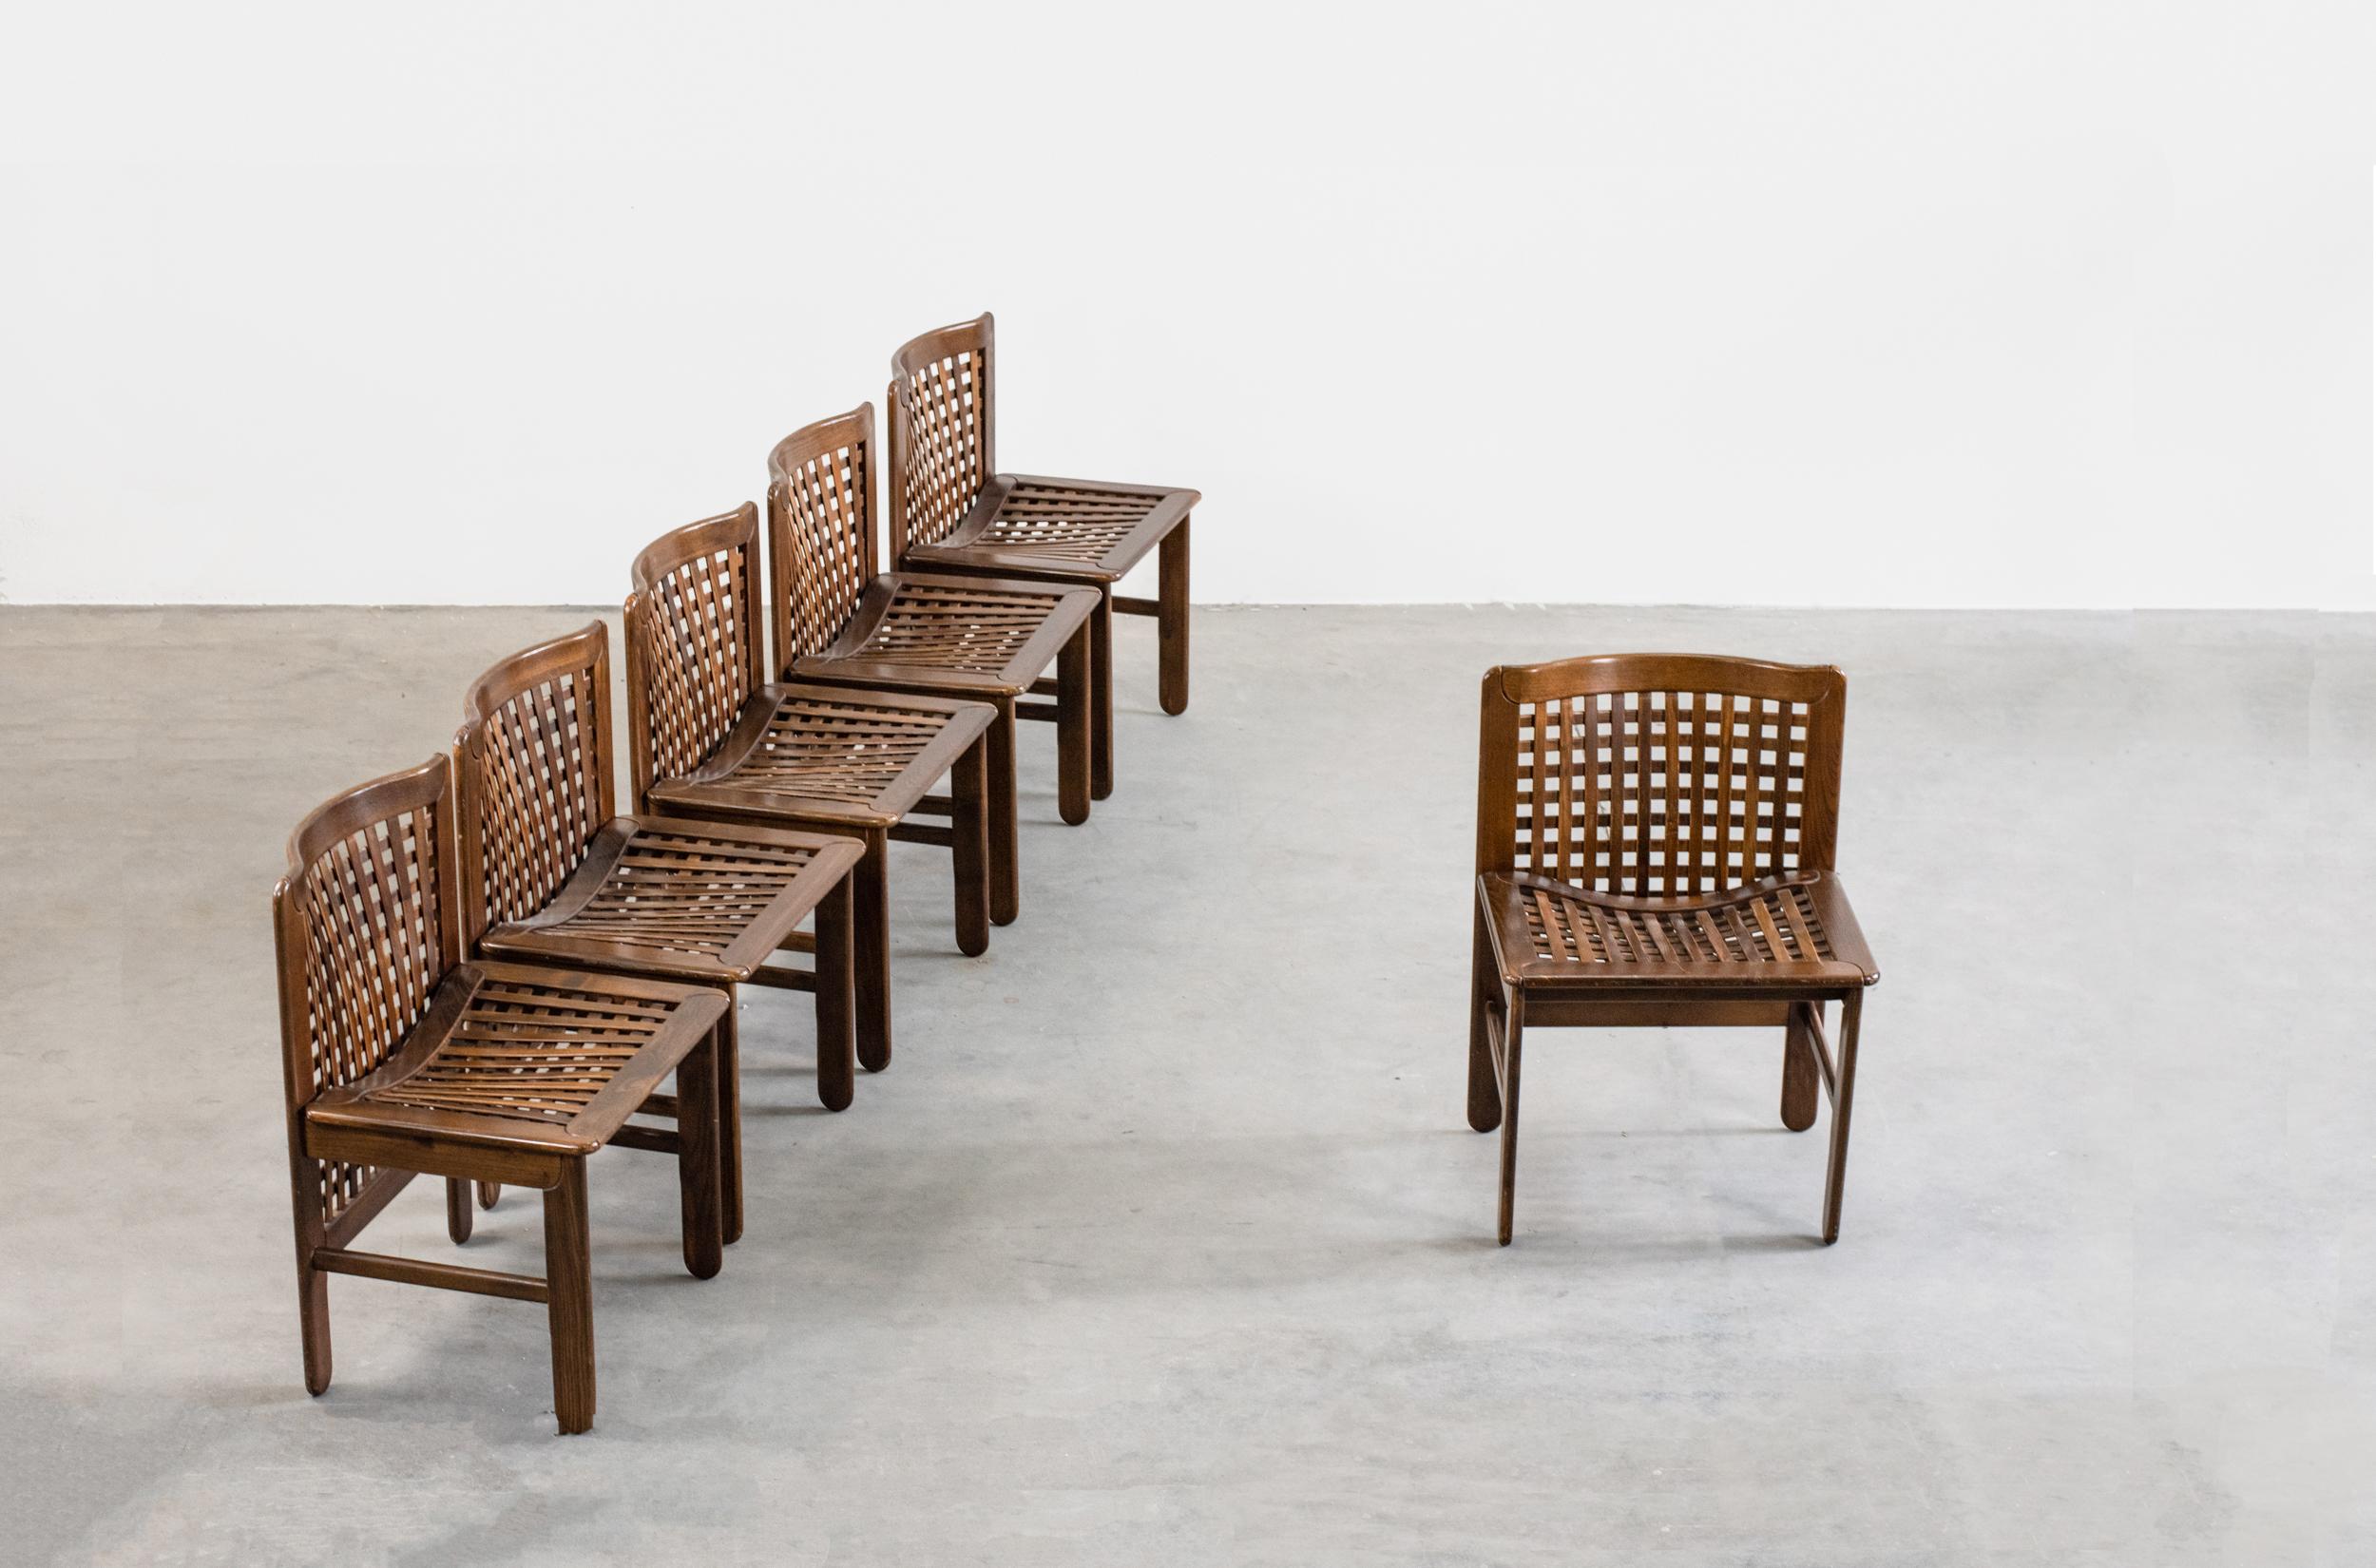 Italian Afra & Tobia Scarpa Set of Six Chairs in Woven Wood, 1960s, Italy